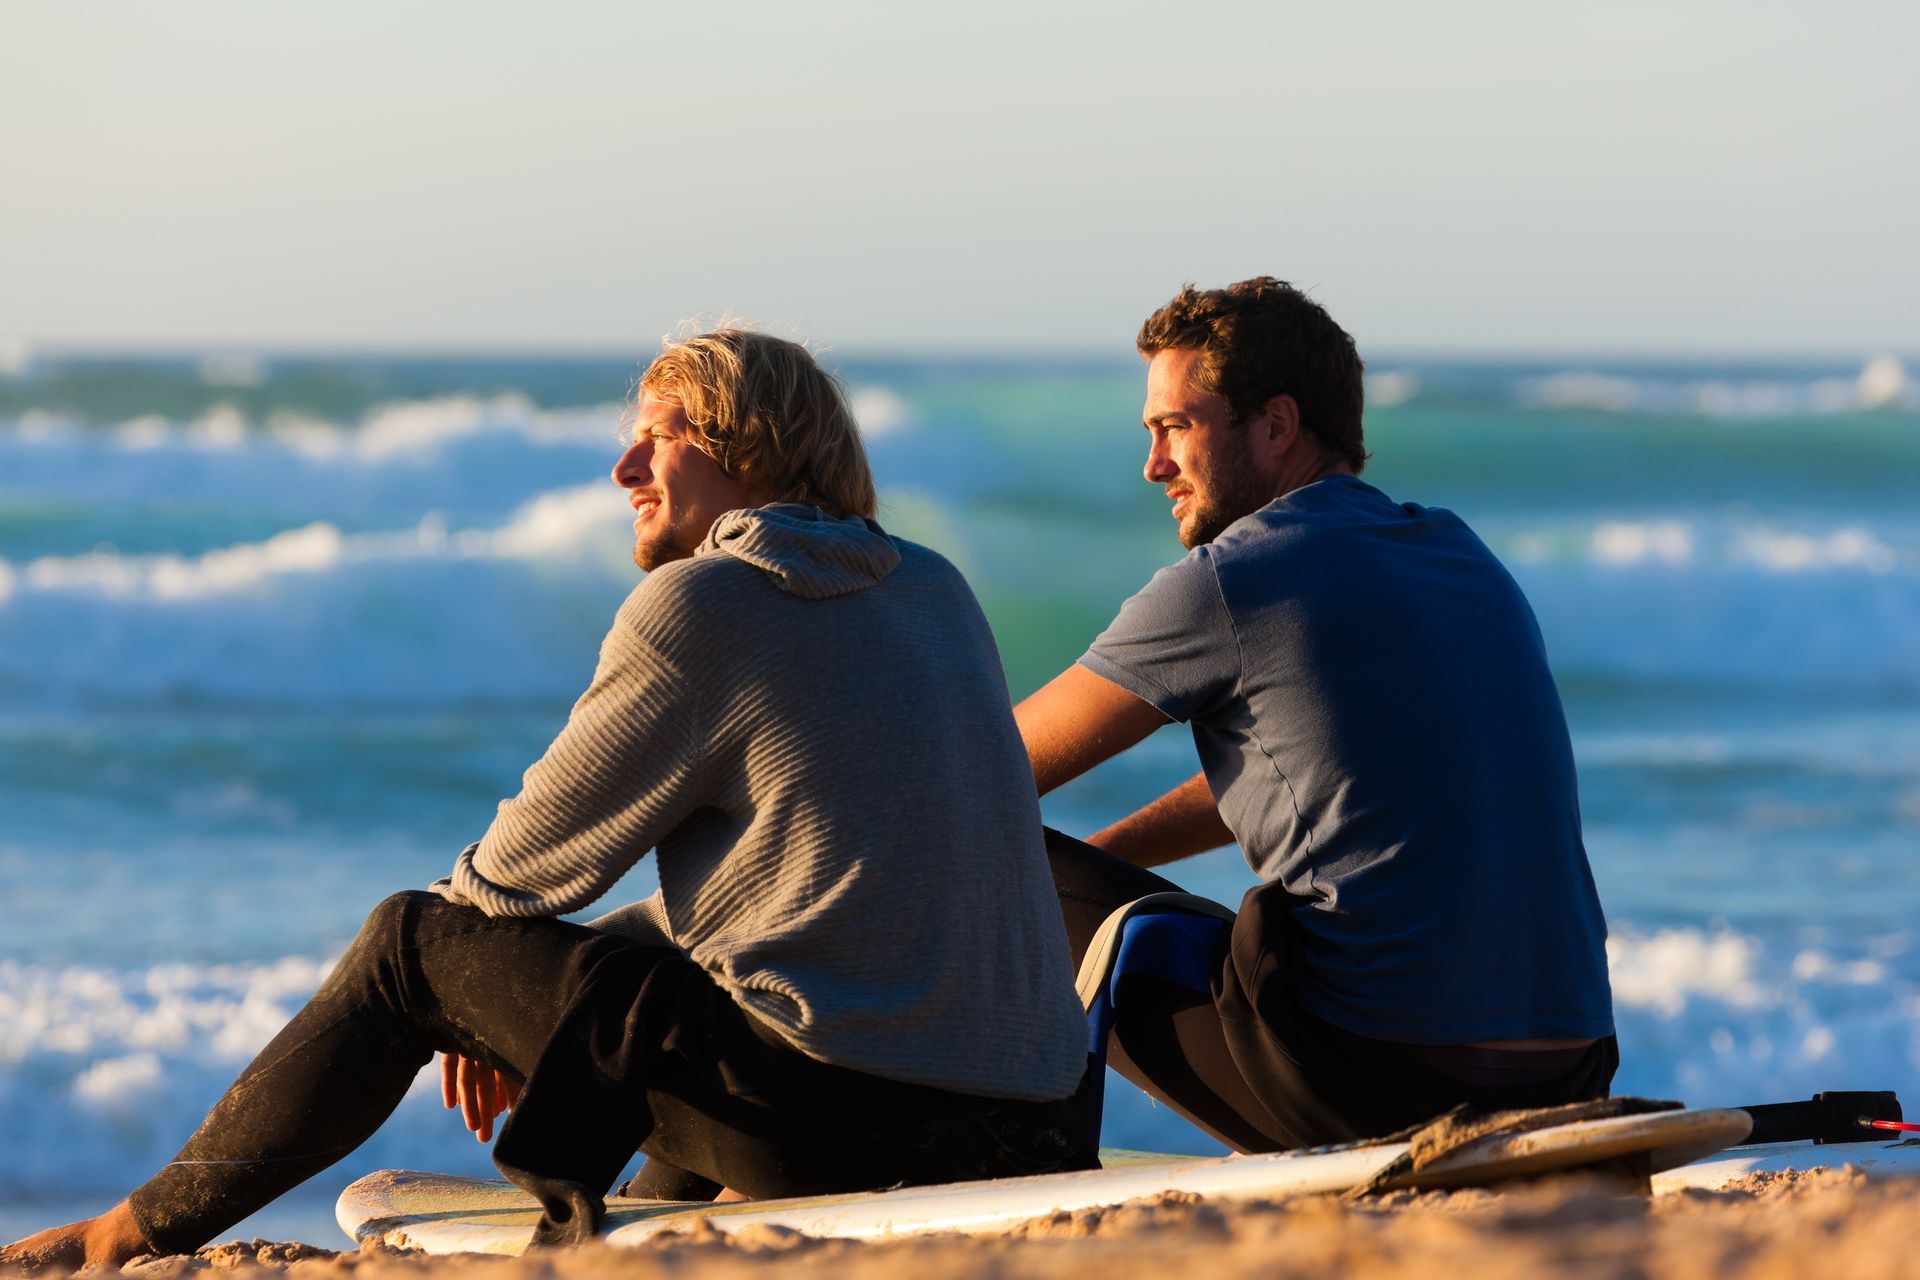 Two young men sit on the sand at a beach and chat.